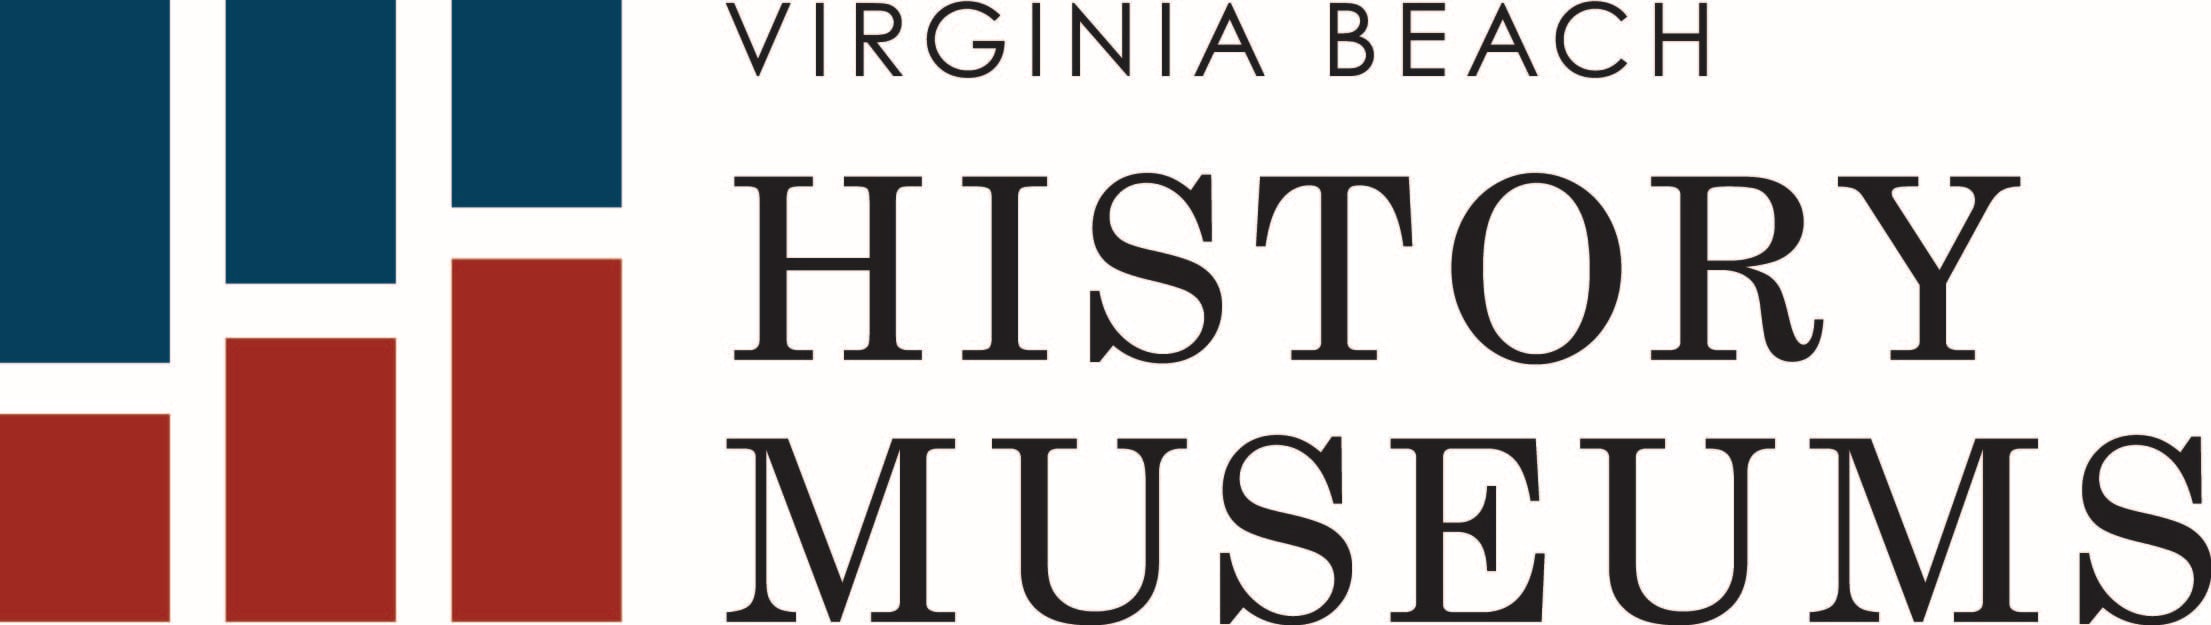 About Virginia Beach History Museums